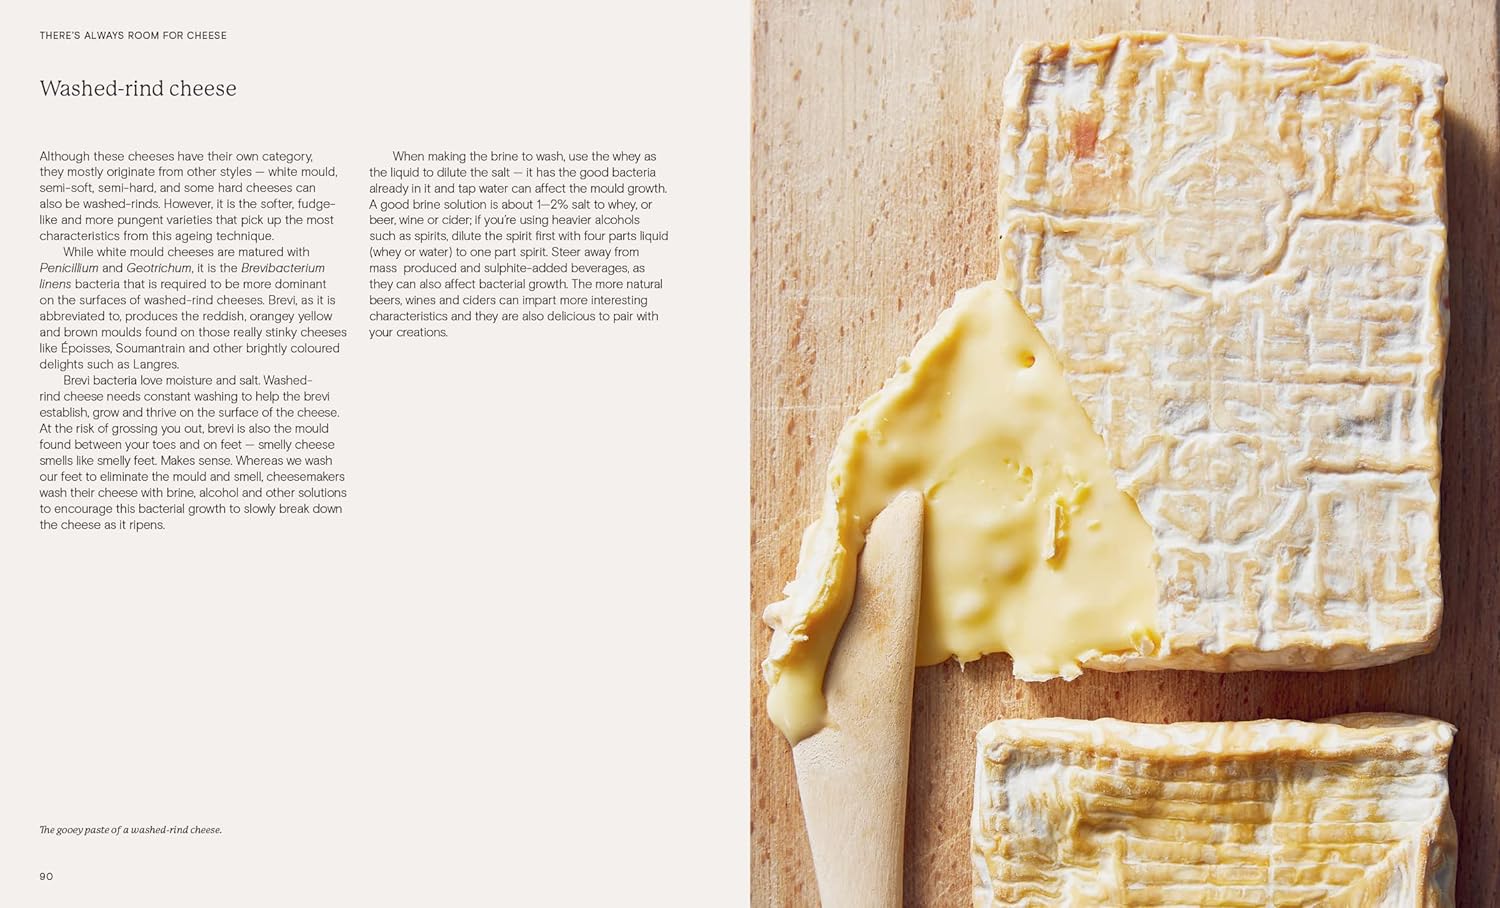 There's Always Room for Cheese: A Guide to Cheesemaking (Colin Wood)